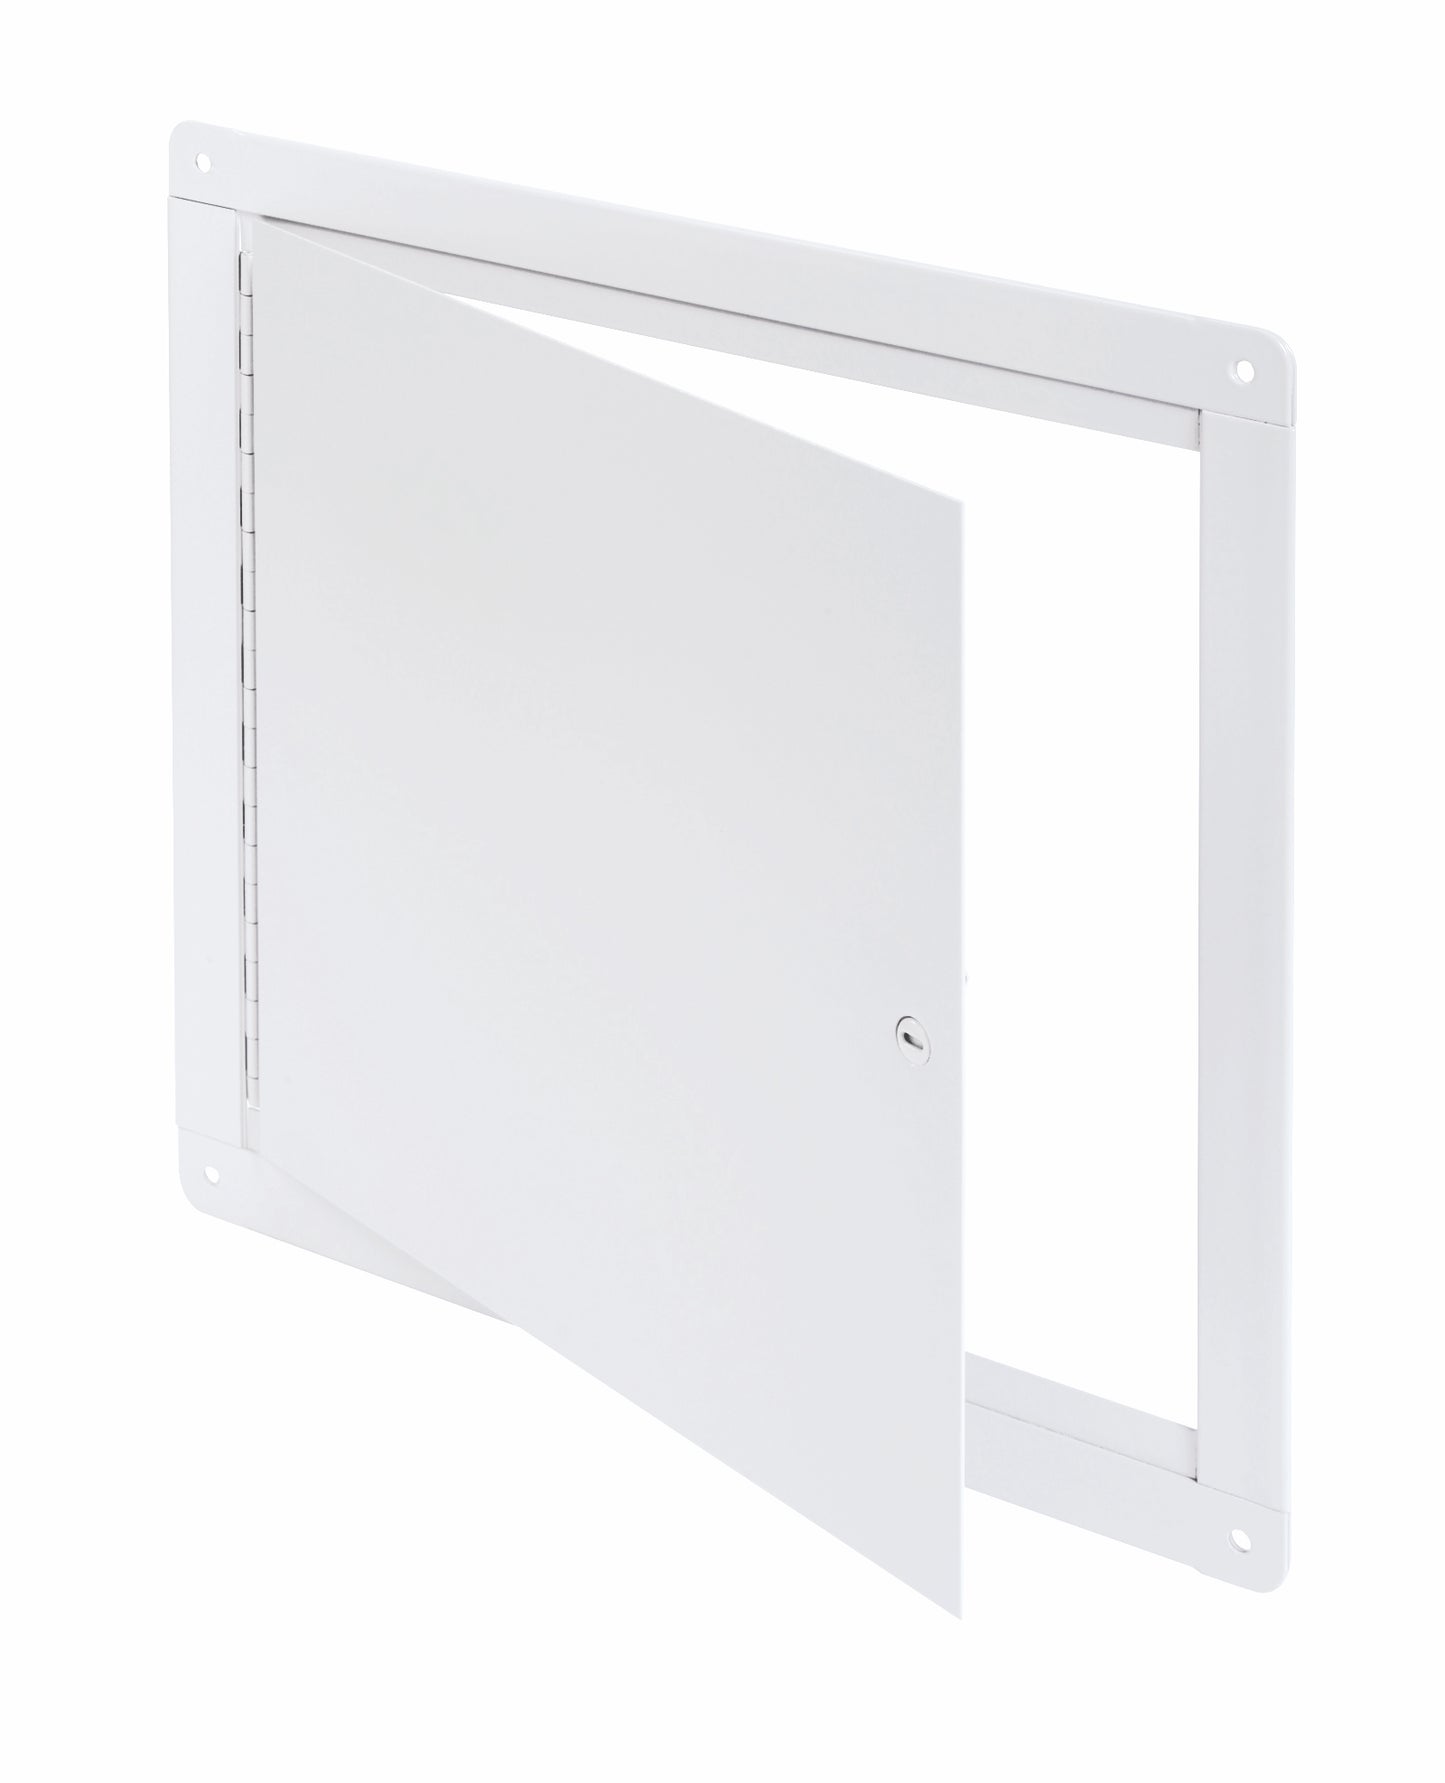 18"x18" Flush Universal Surface Mounted Access Door with Exposed Flange, Cendrex